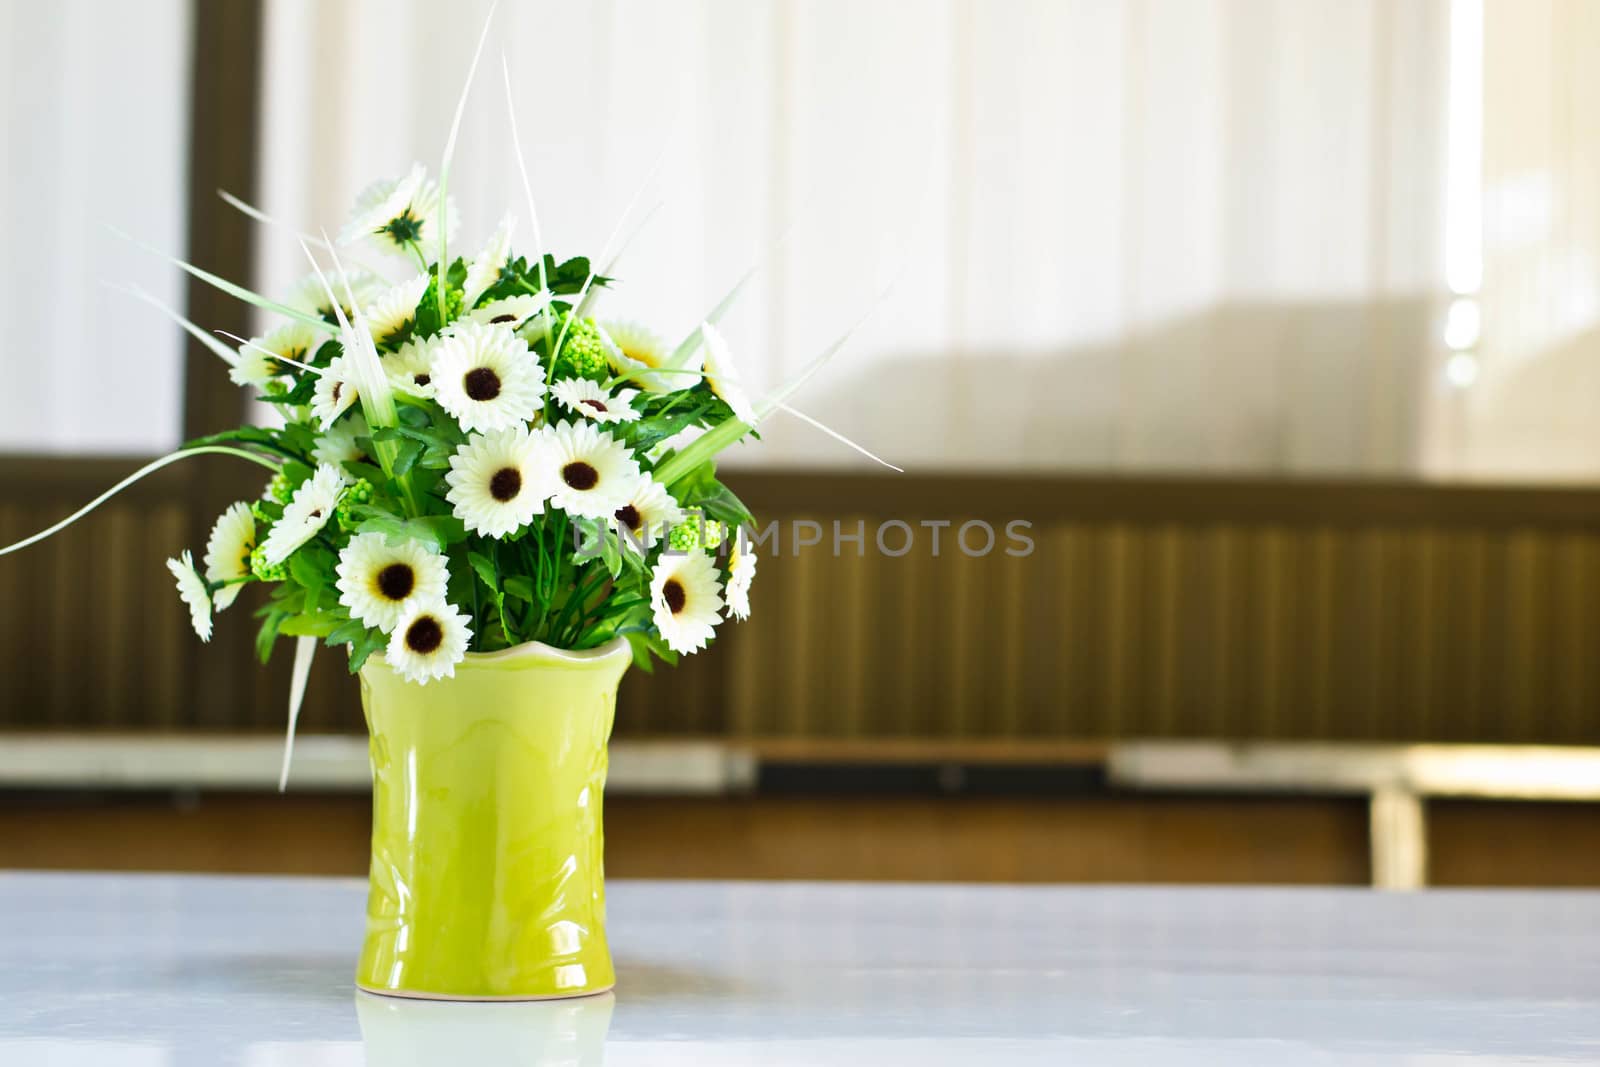  Beautiful flower in a vase on wooden table by Thanamat